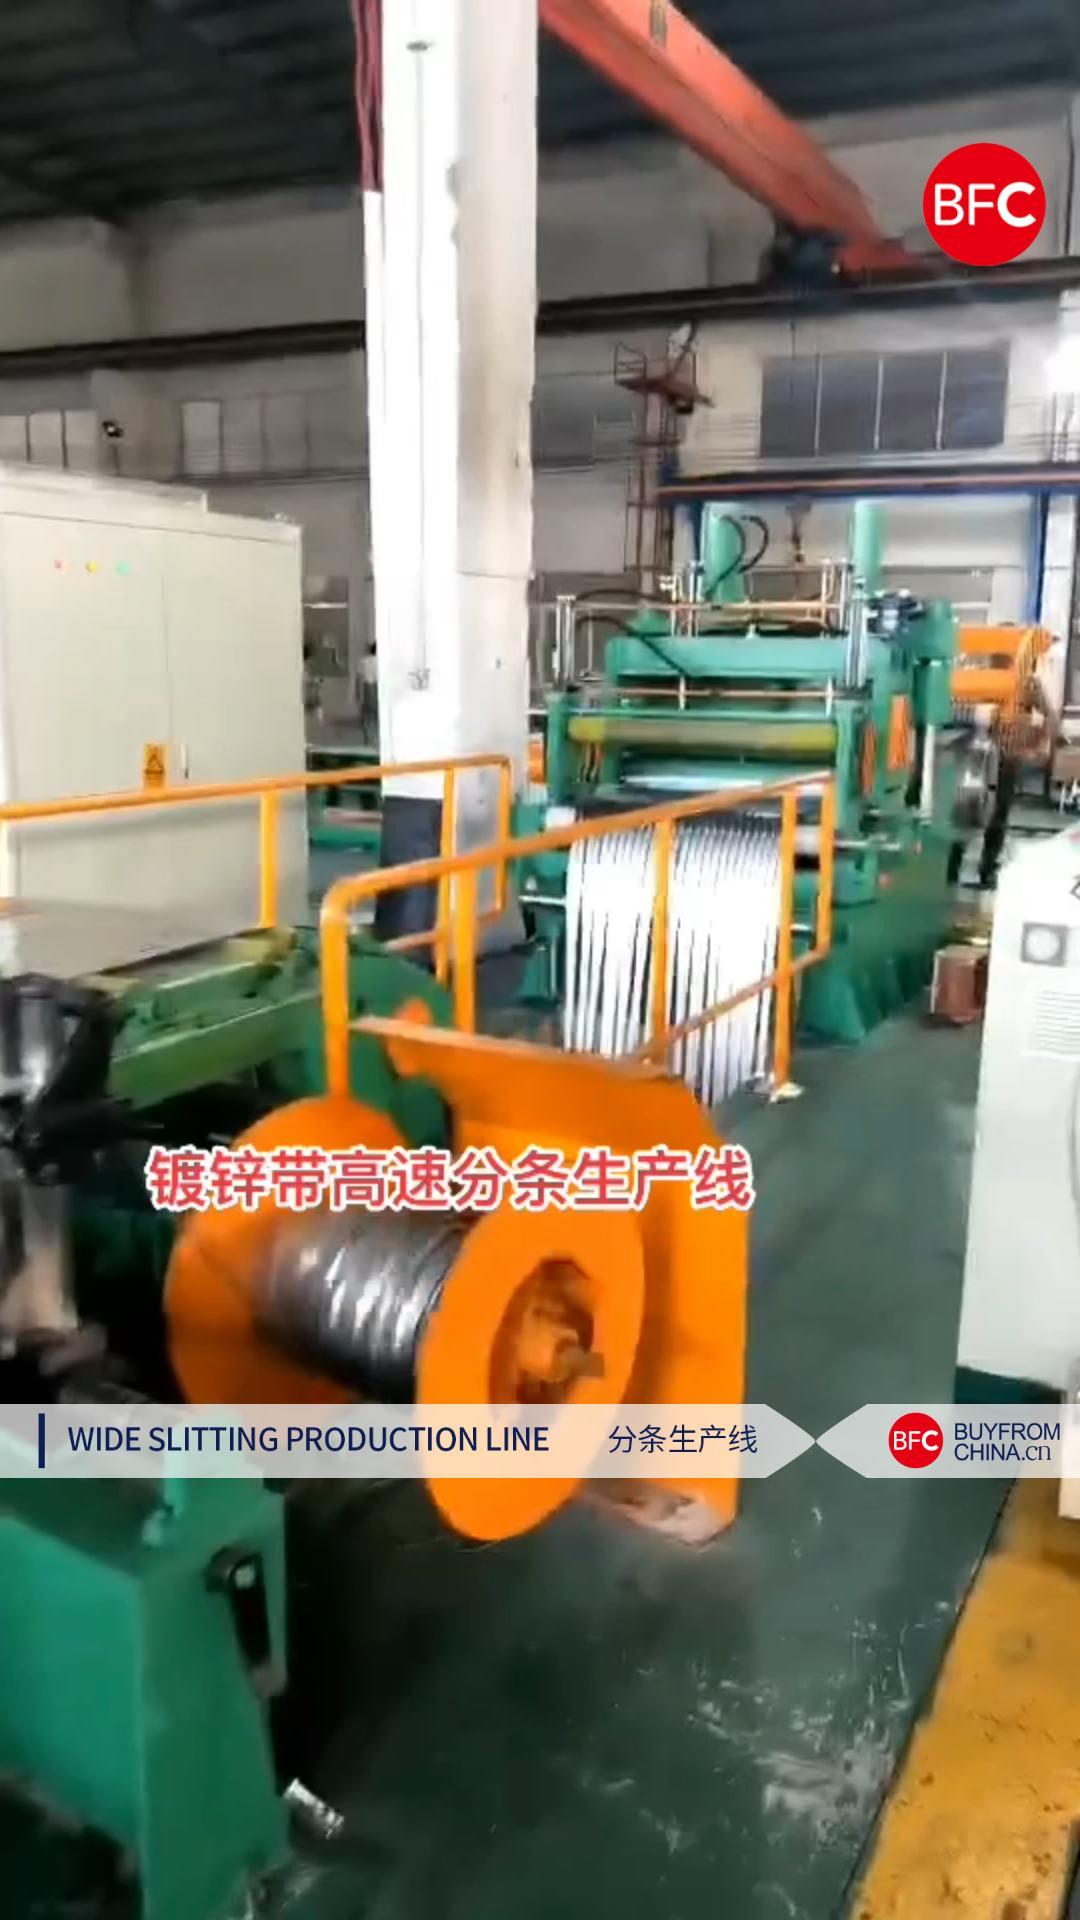 WIDE SLITTING PRODUCTION LINE